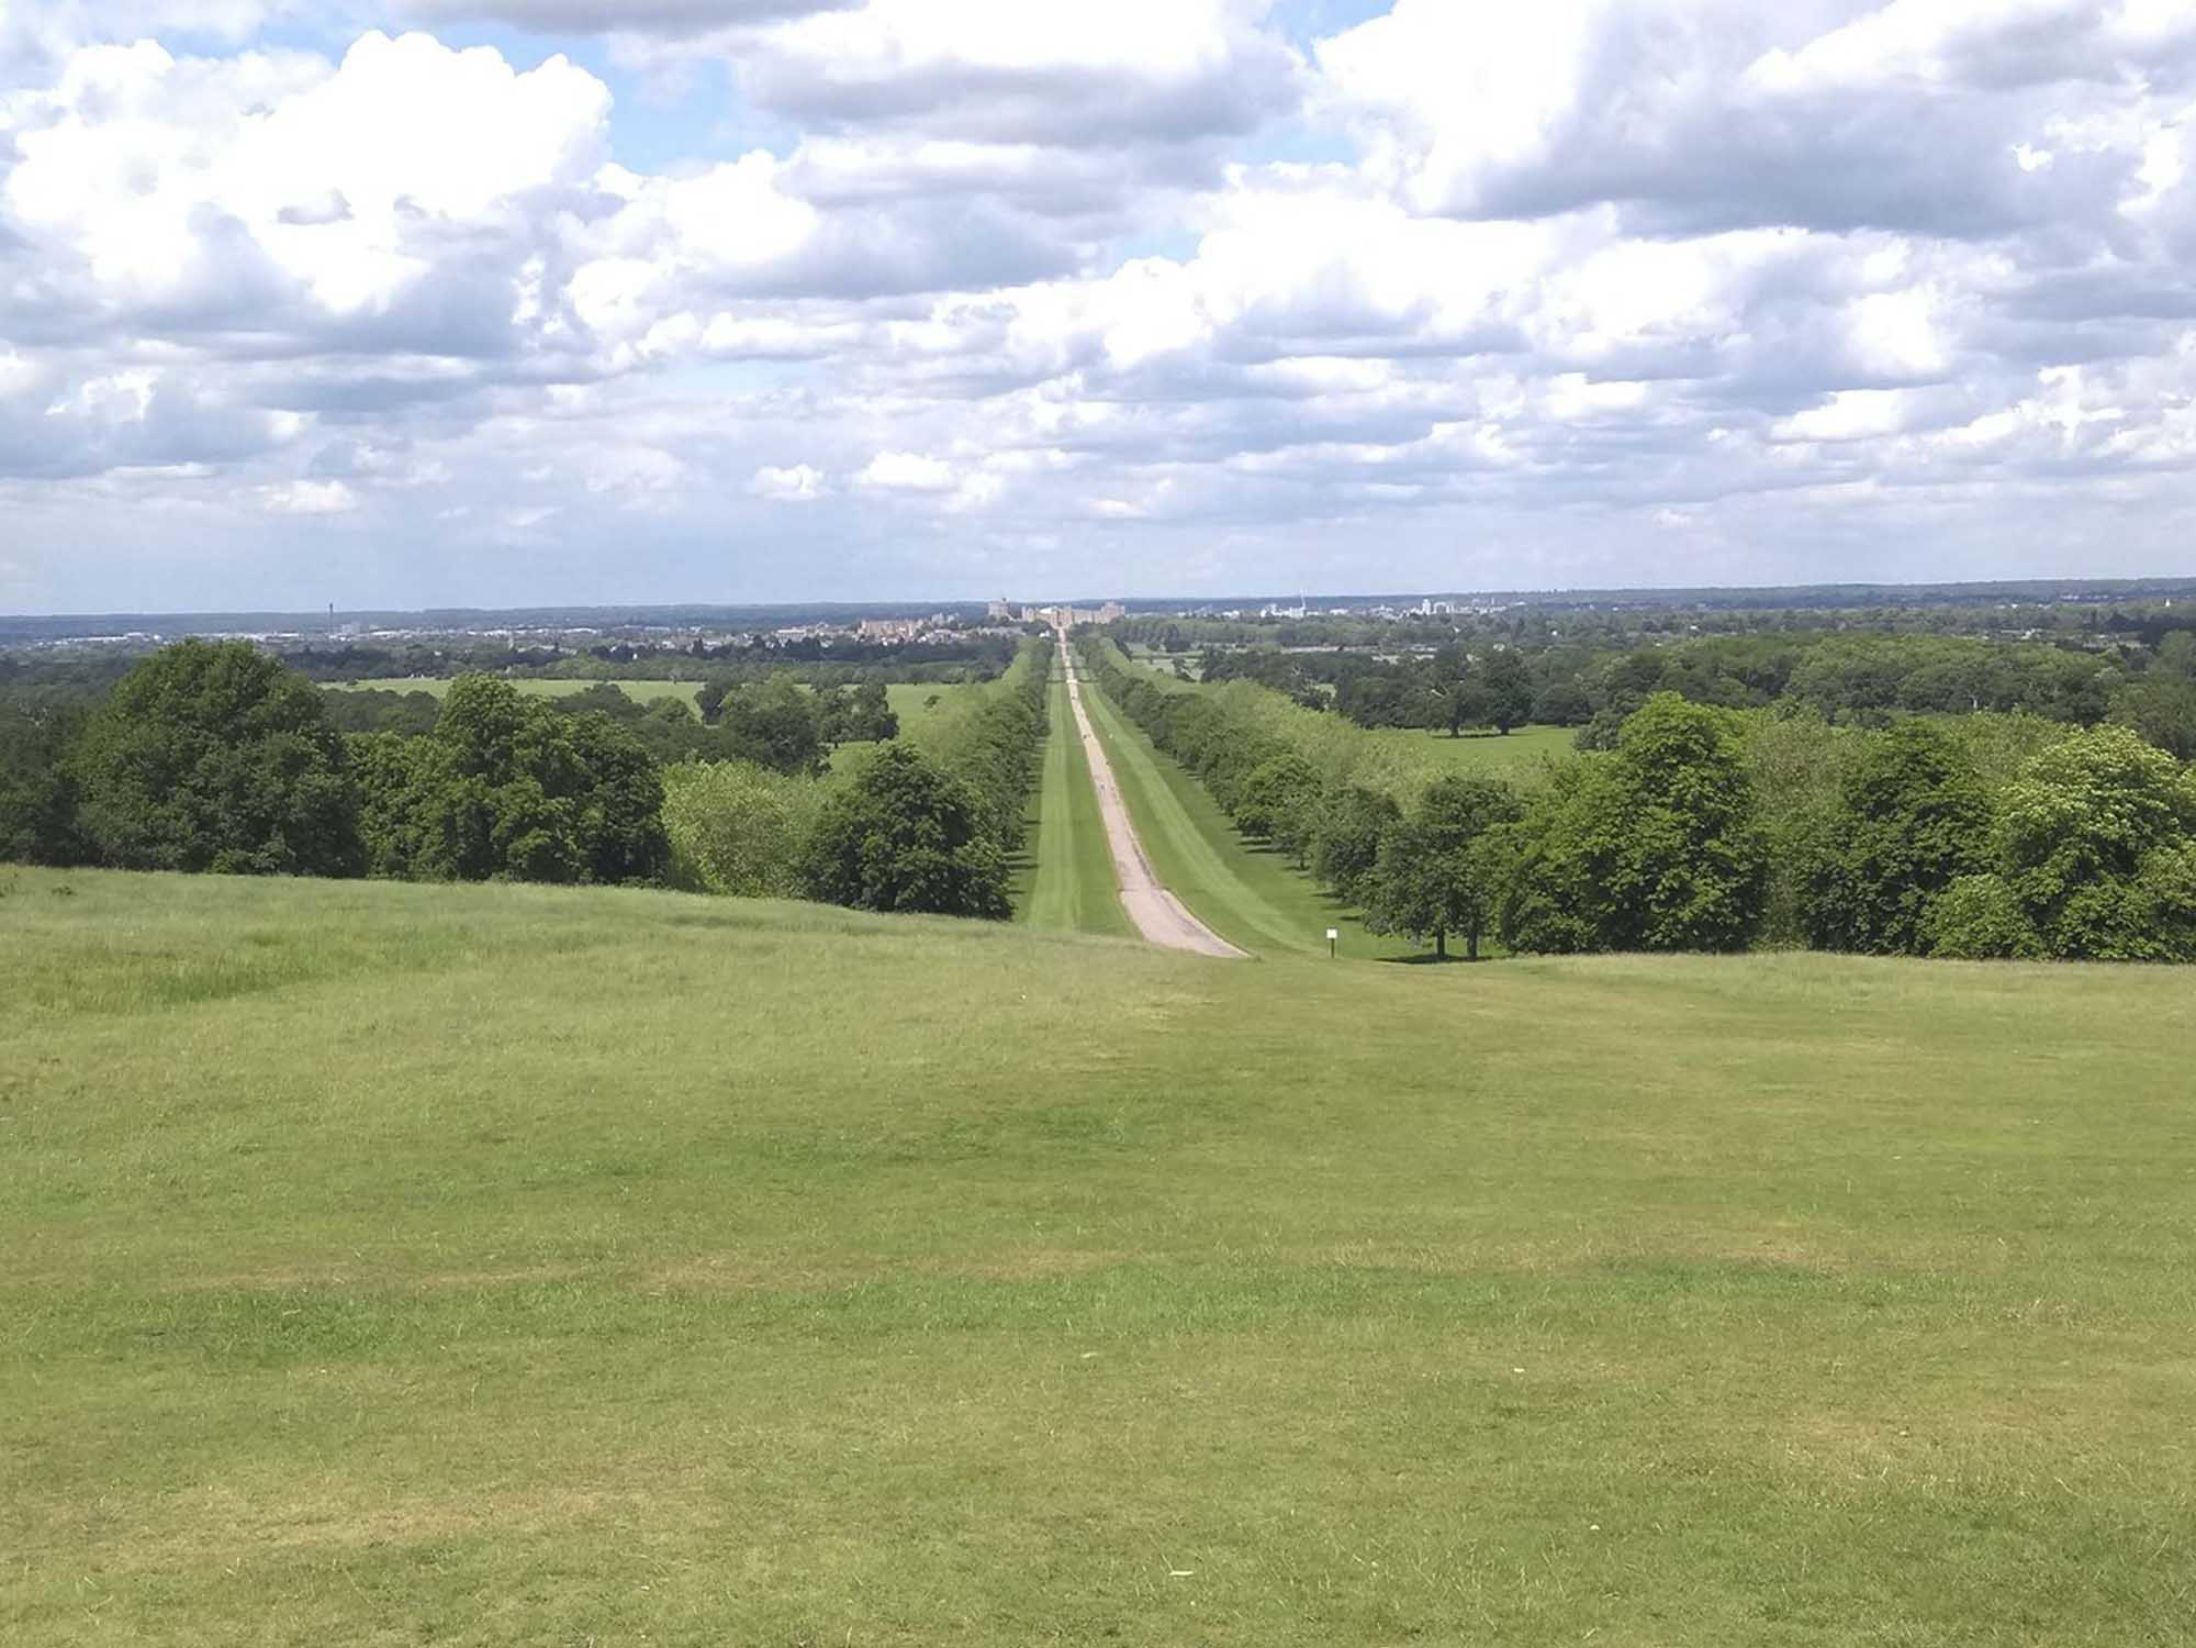 Things to do in Windsor - Windsor Great Park